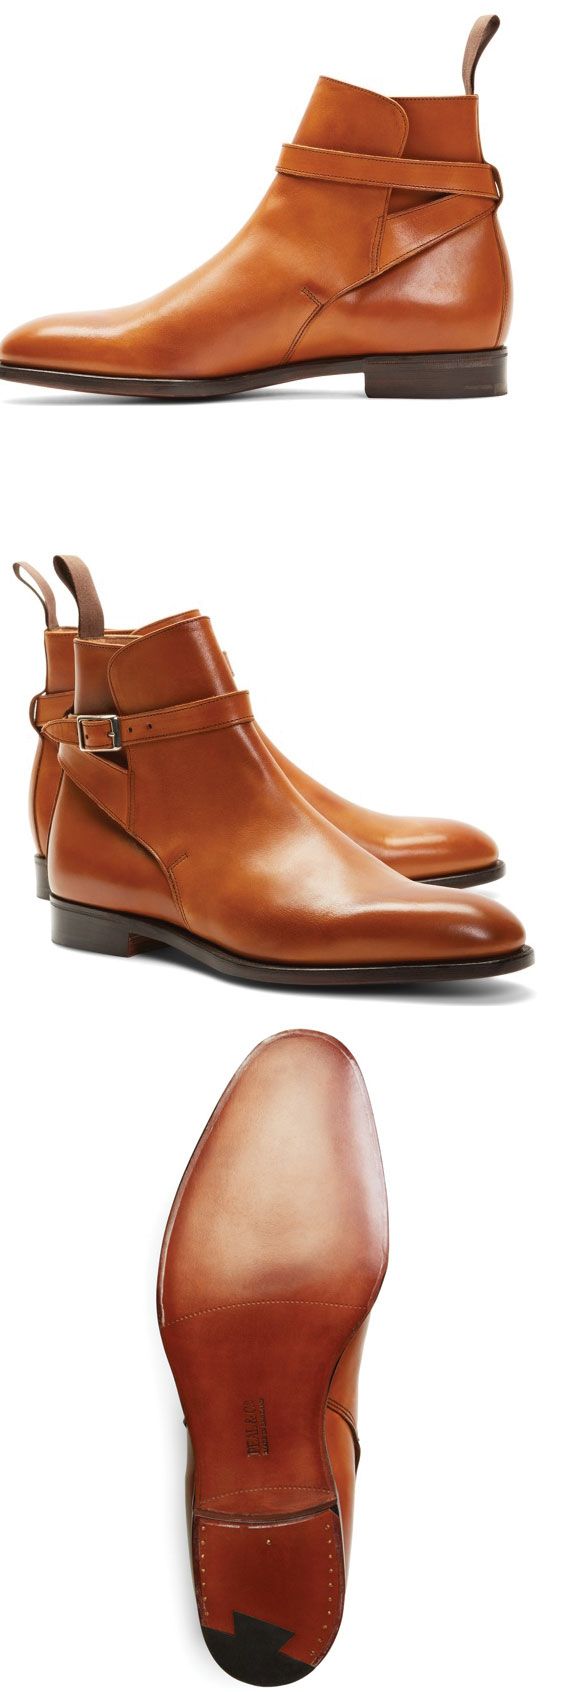 Brooks Brothers Peal & Co.® Leather Ankle Strap Buckle Boots $698...